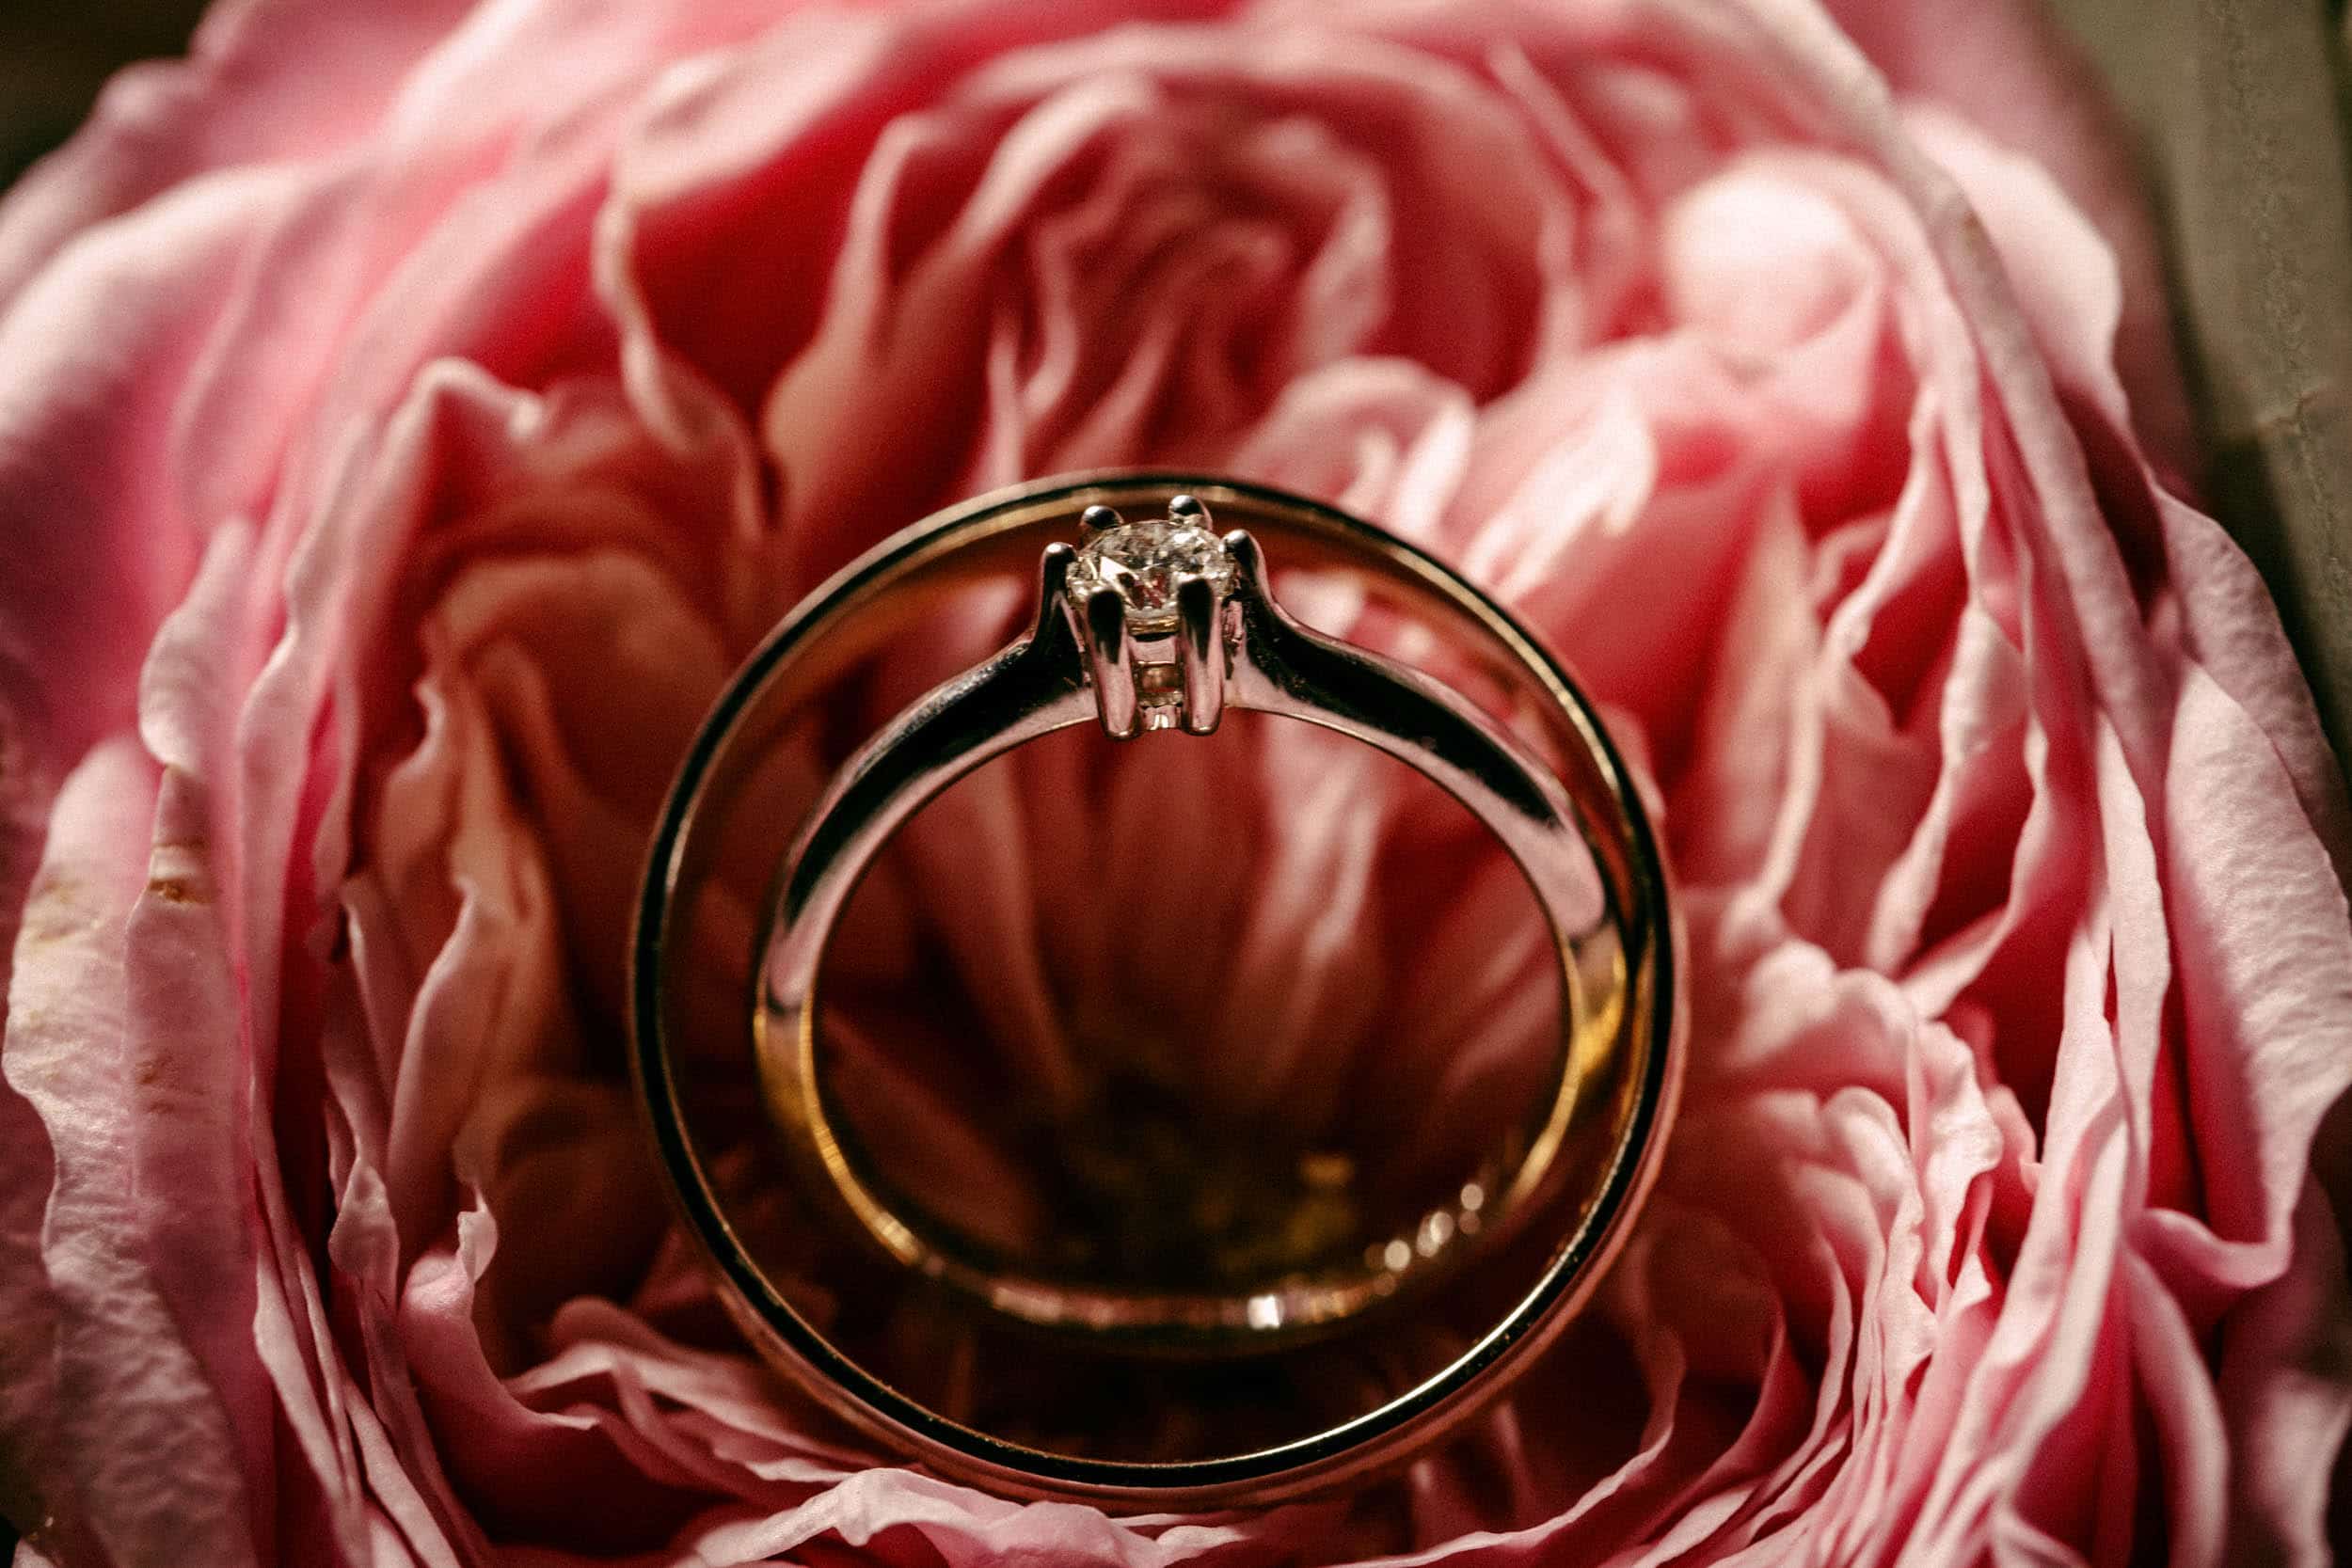 The perfect wedding is captured in a Wedding Photo with an engagement ring resting elegantly on a pink flower.